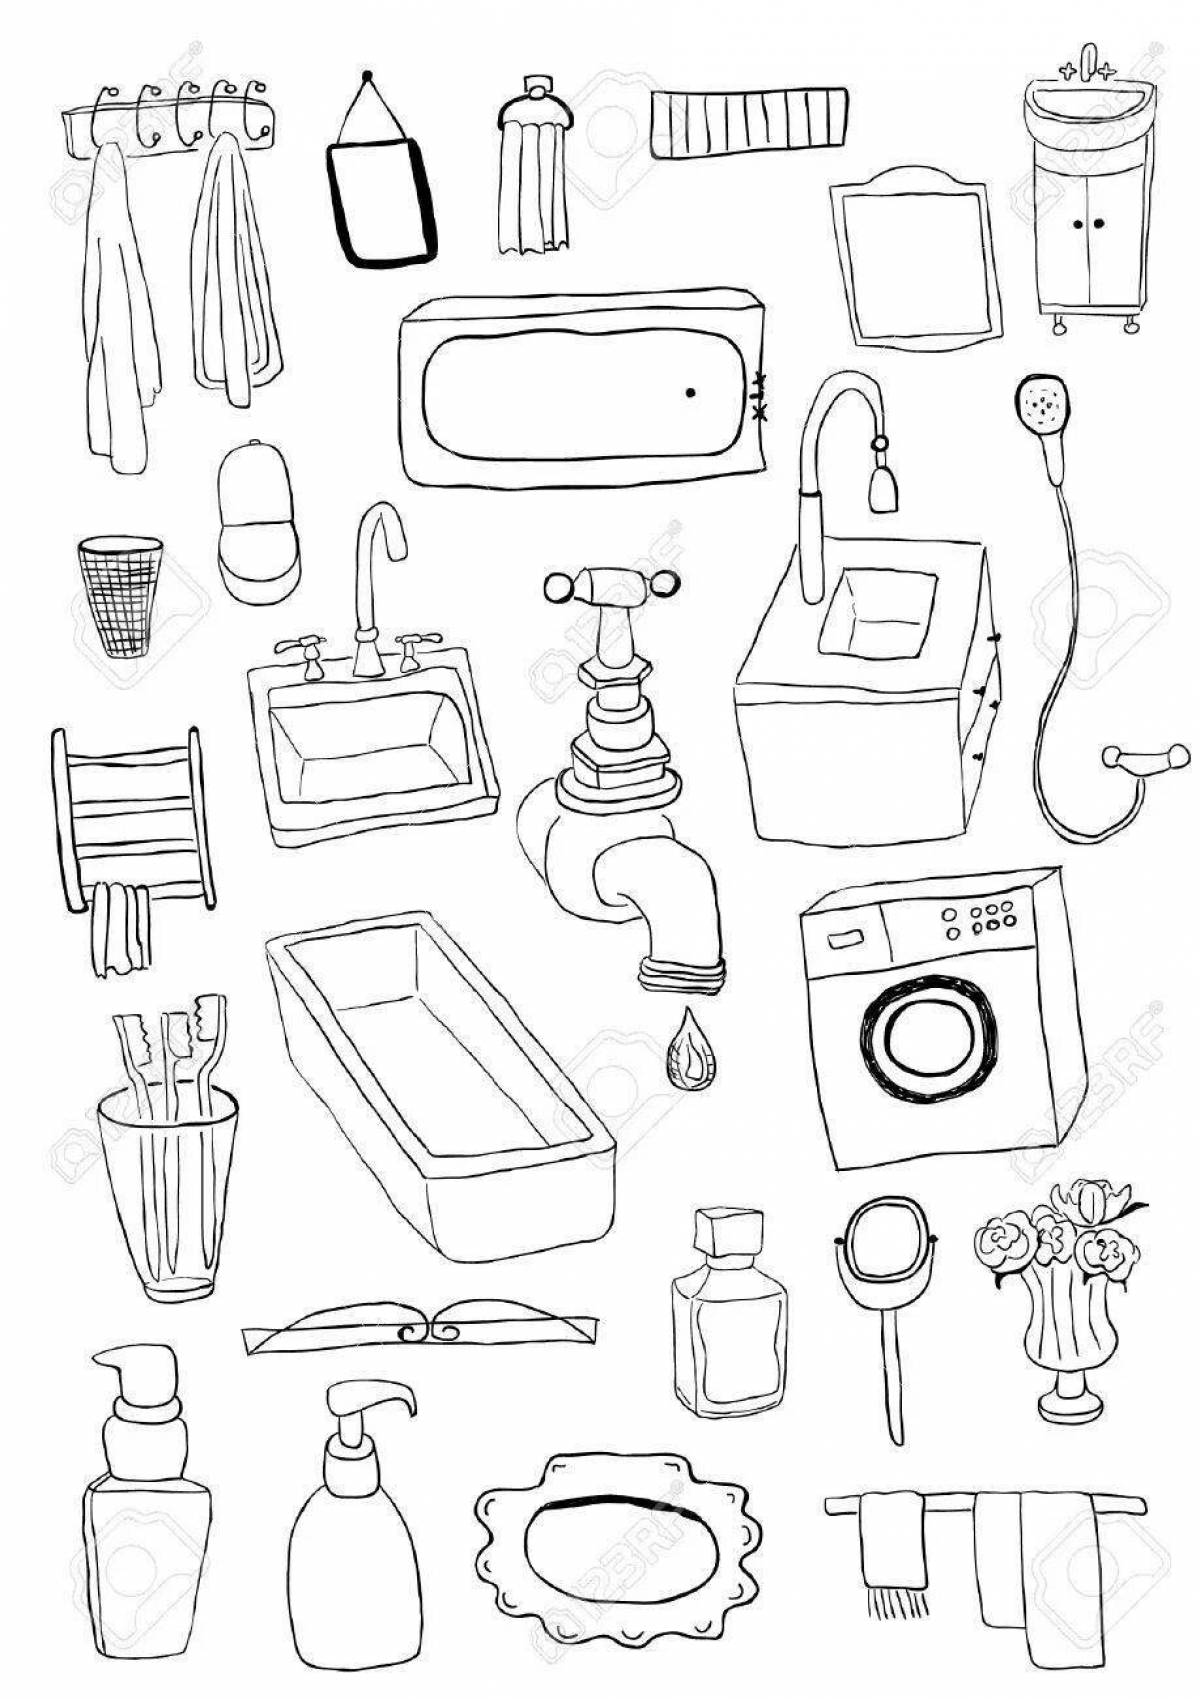 Fabulous bathroom accessories coloring page